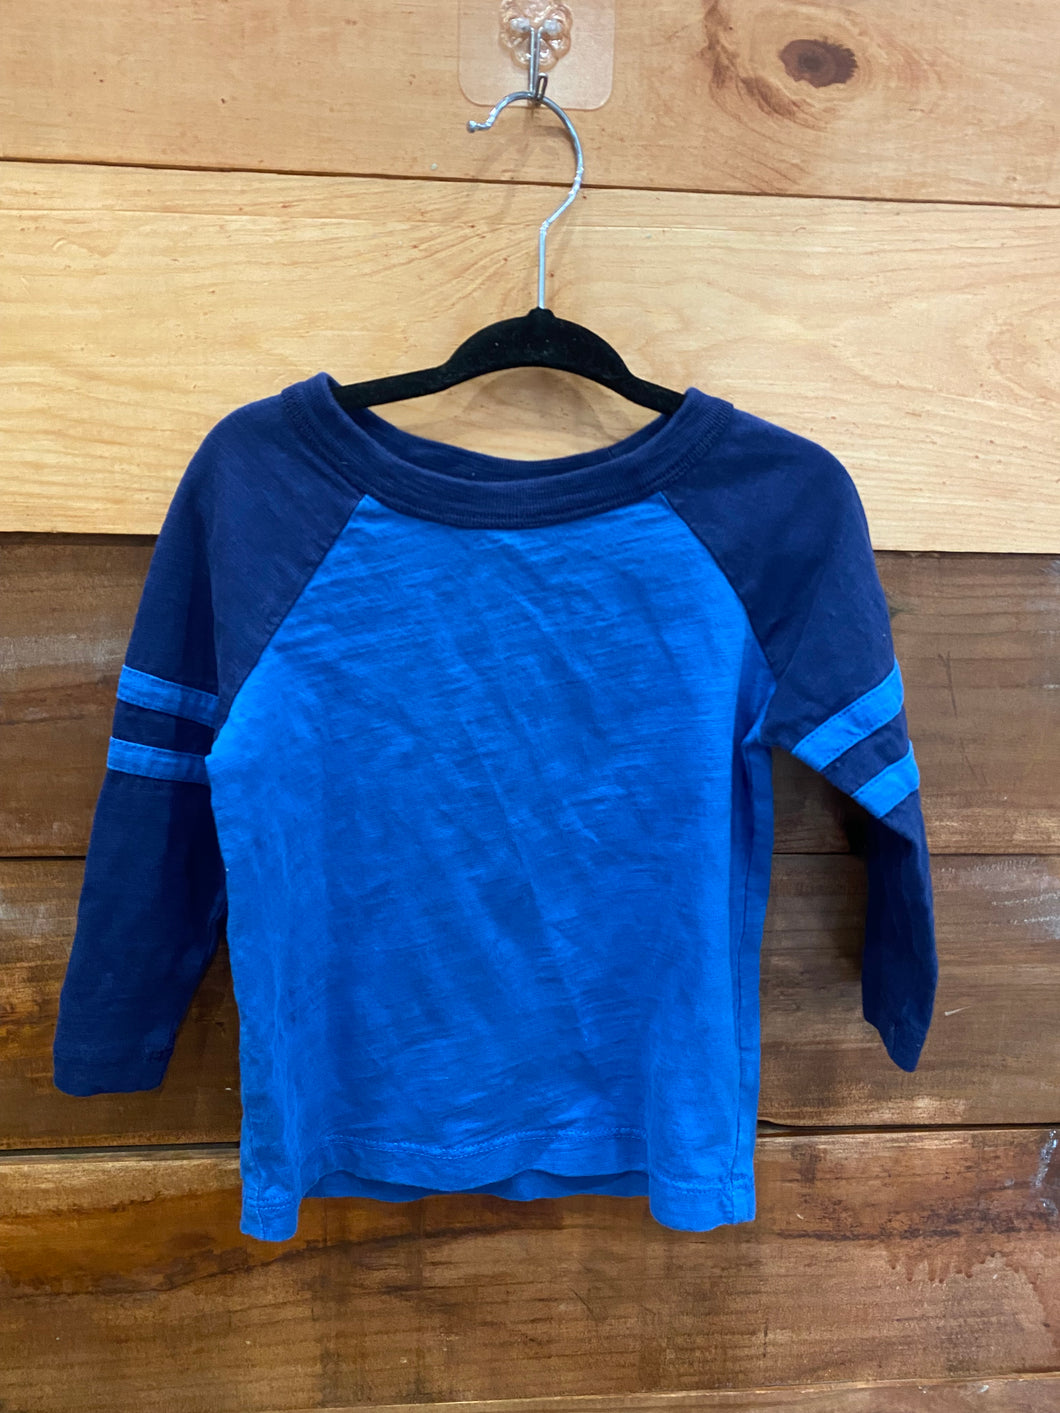 Hanna Andersson Blue Shirt Size 18-24m